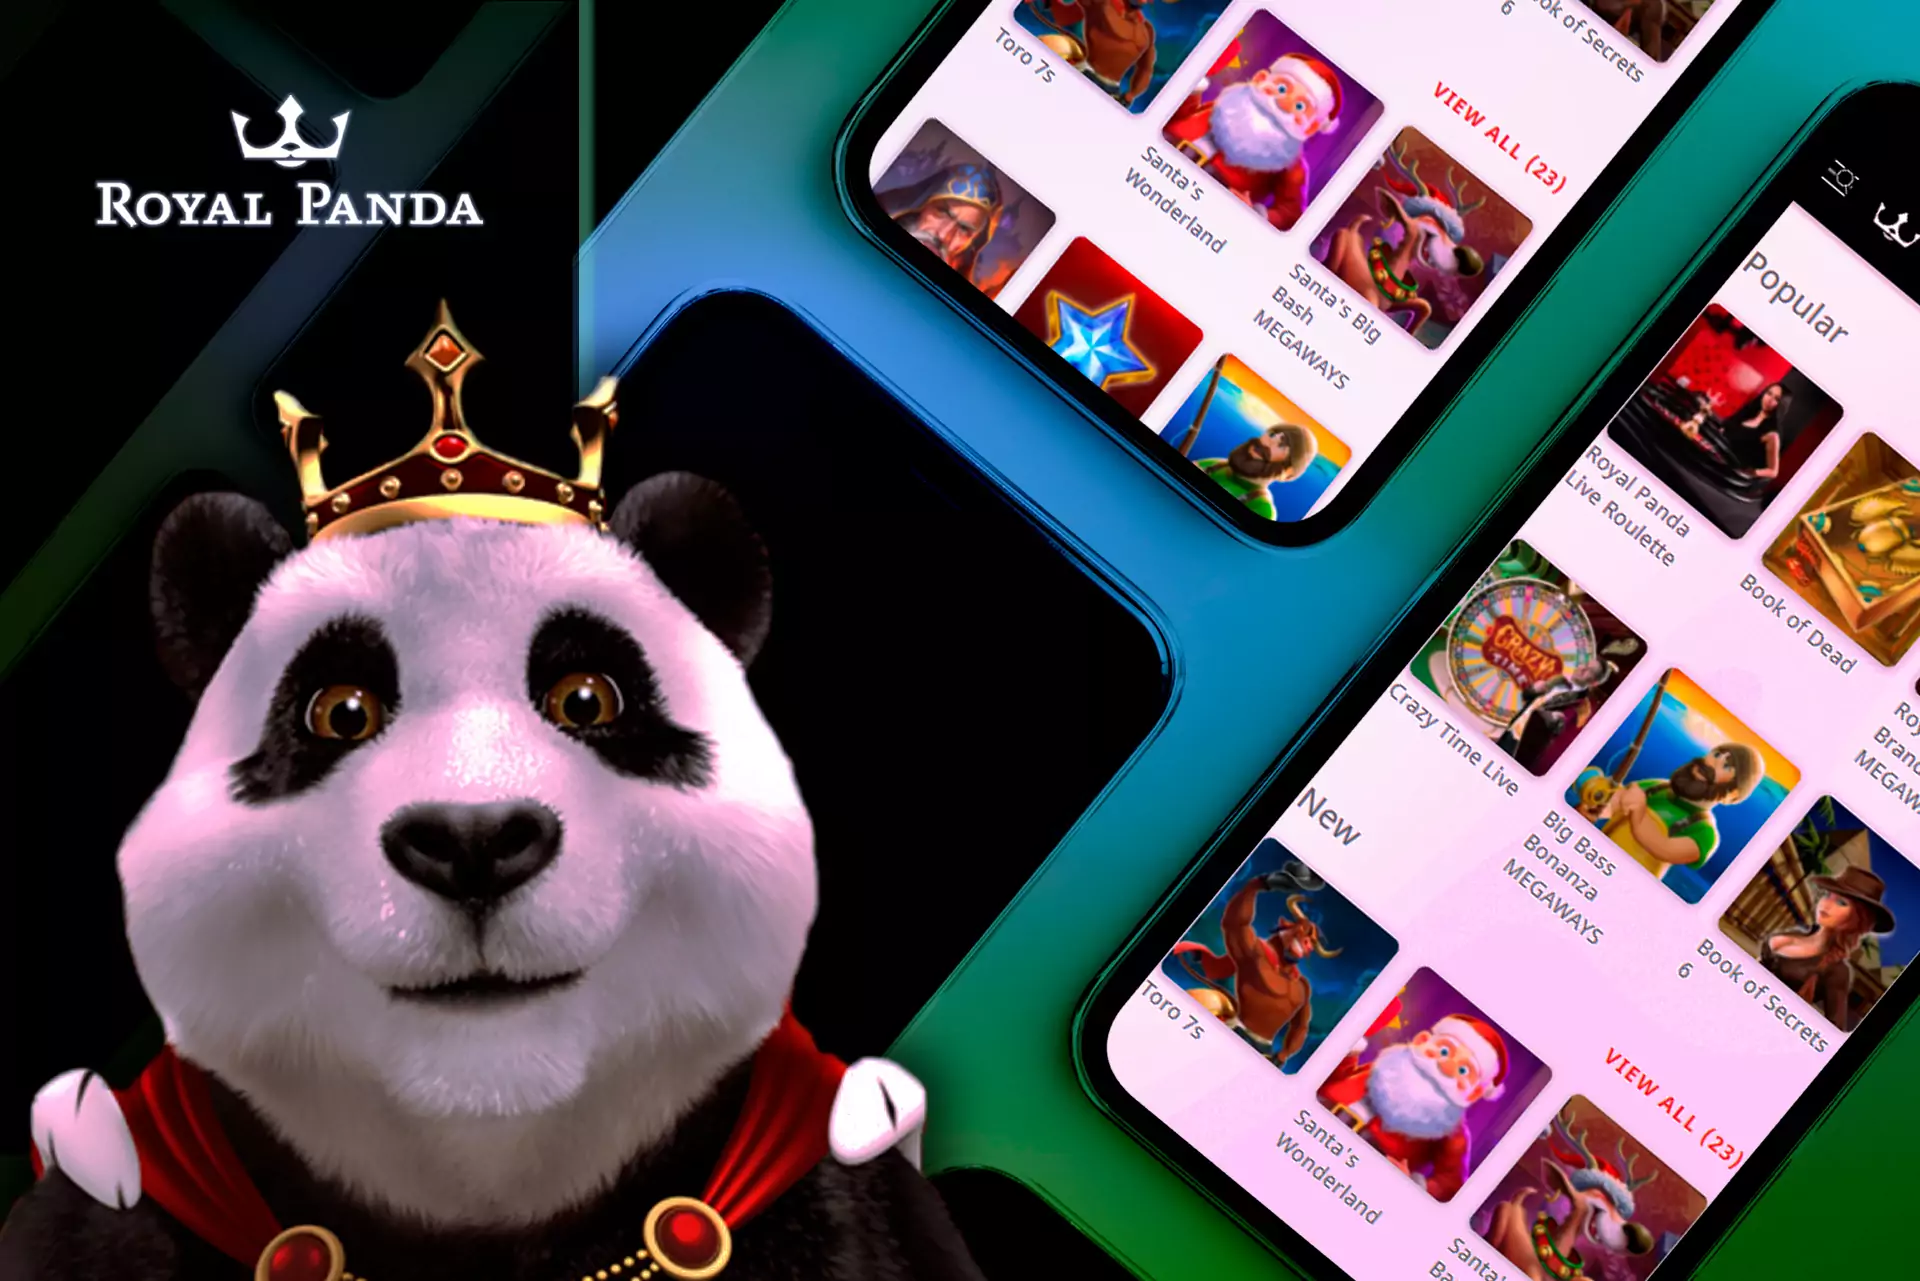 The Royal Panda Casino attracts users from India with the help of lots of bonus offers and its own loyalty program.